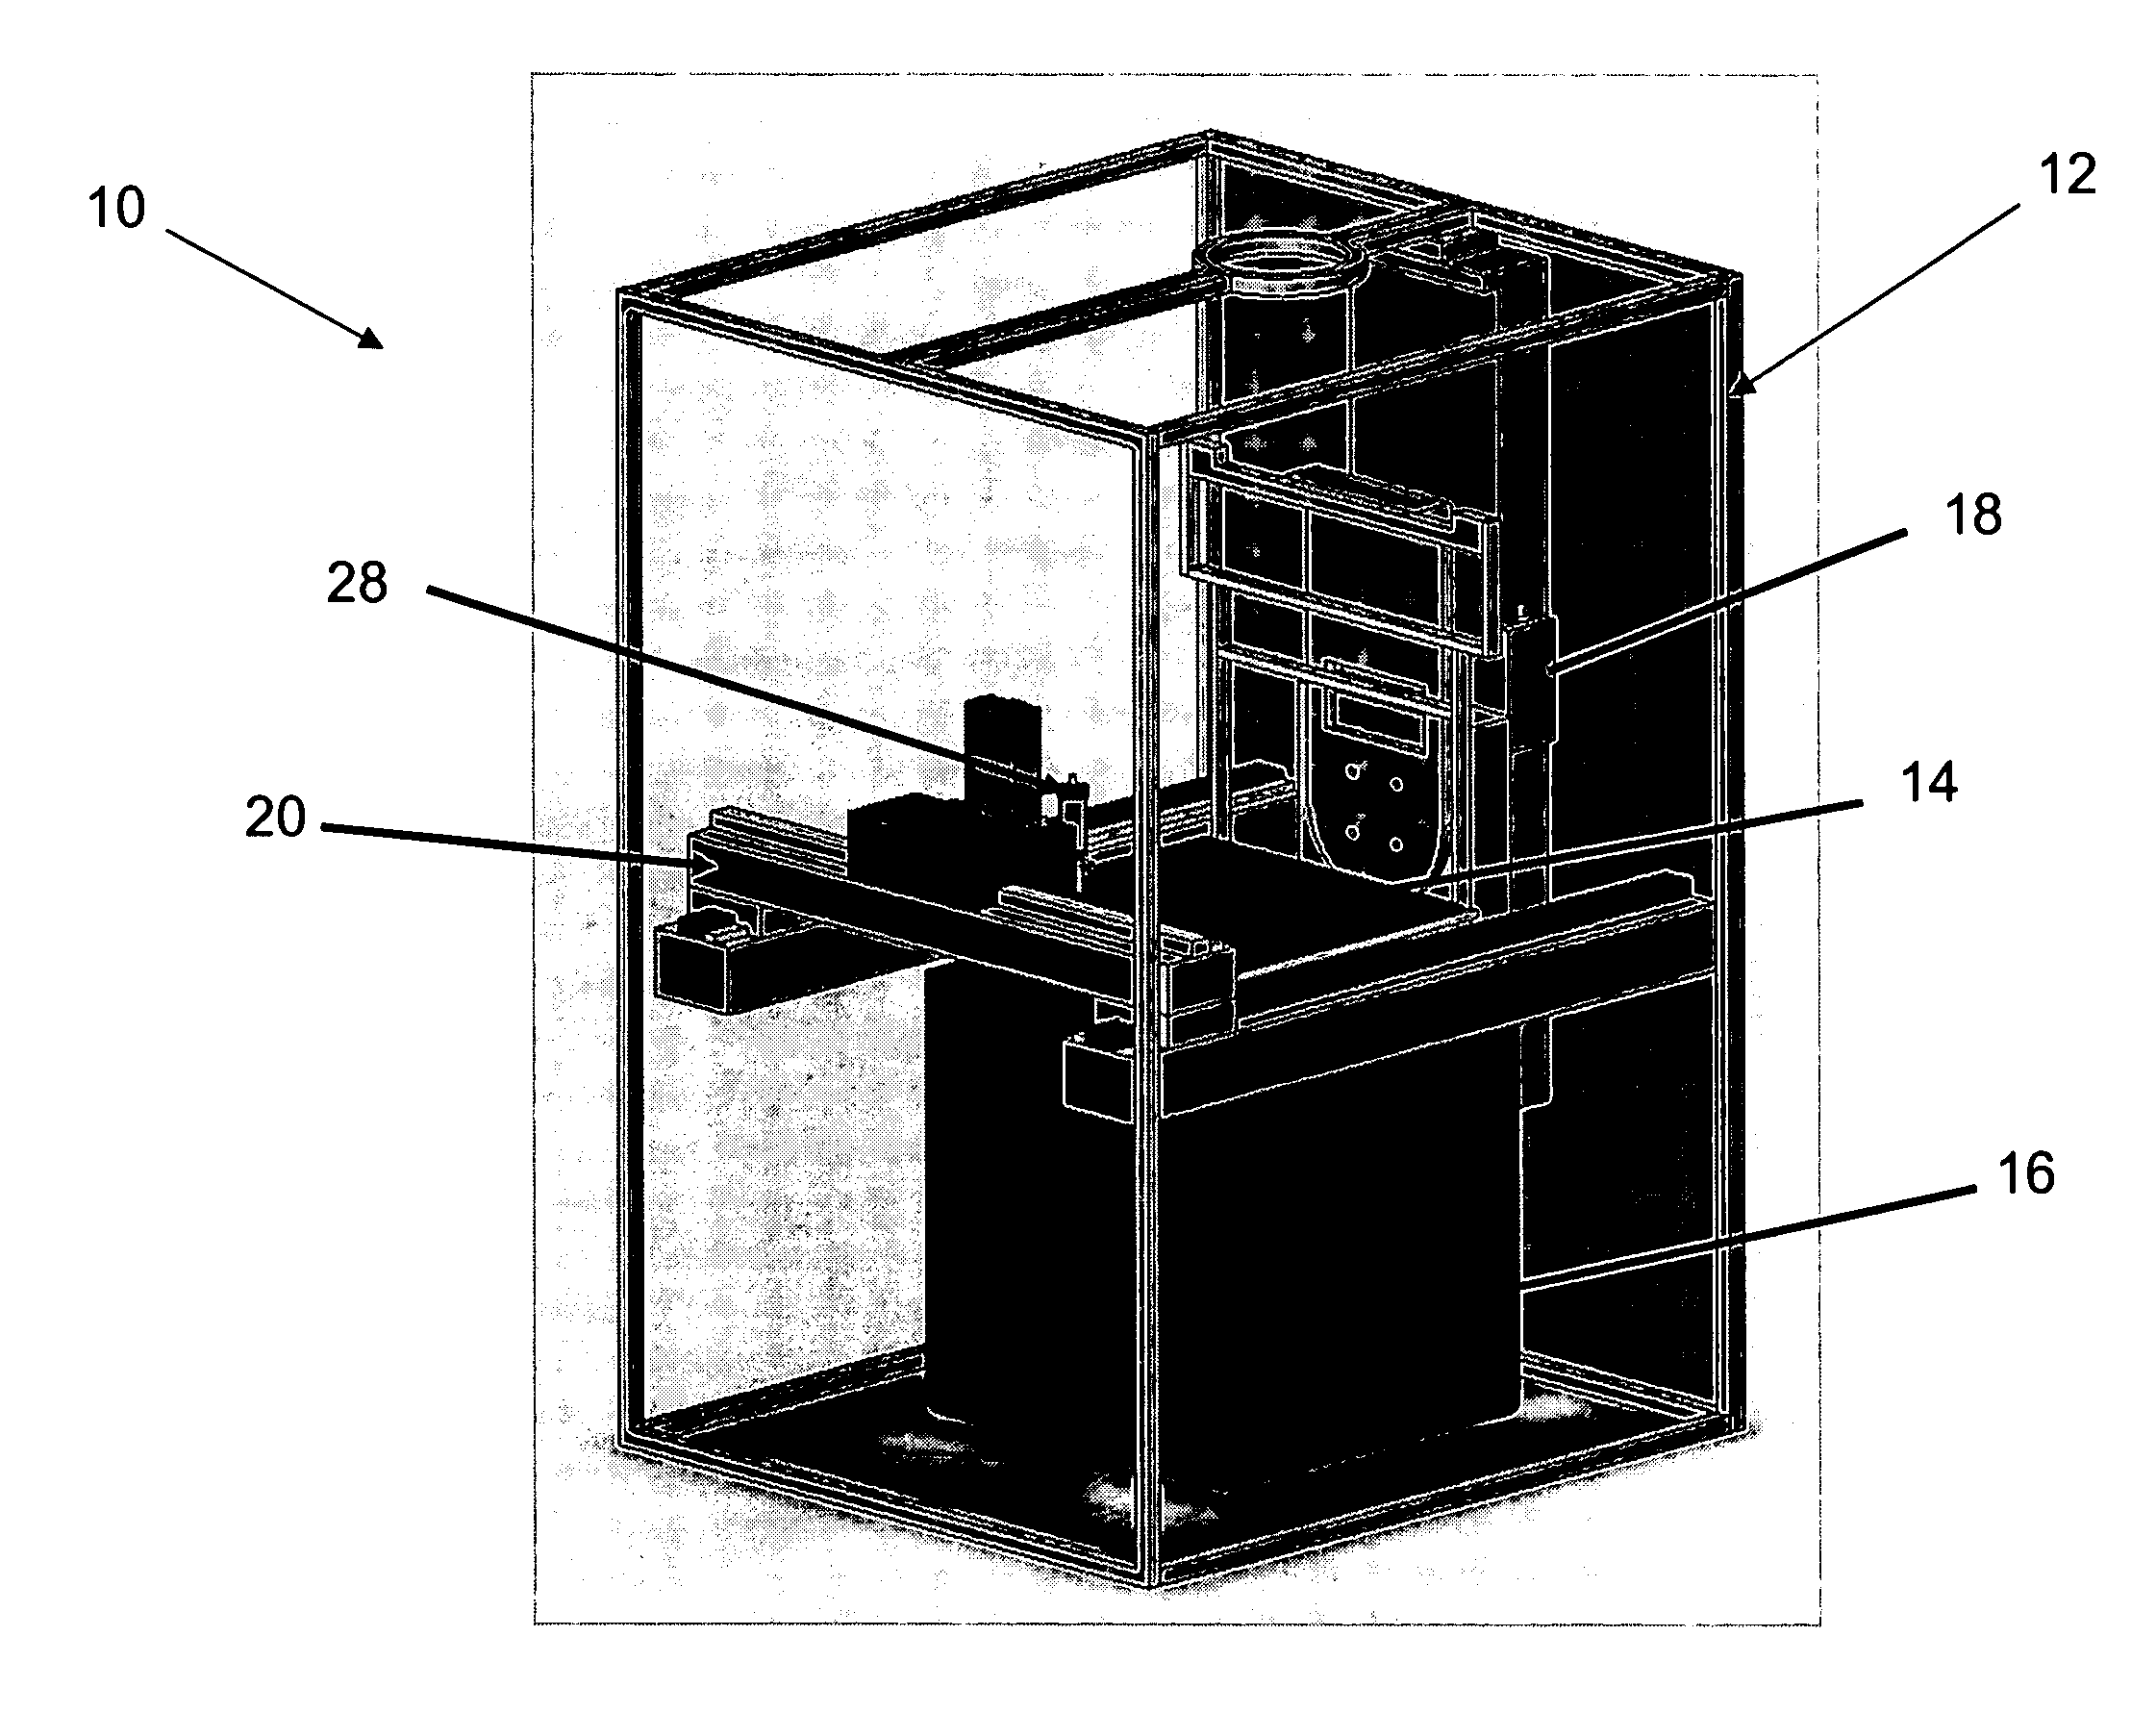 Methods and systems for integrating fluid dispensing technology with stereolithography